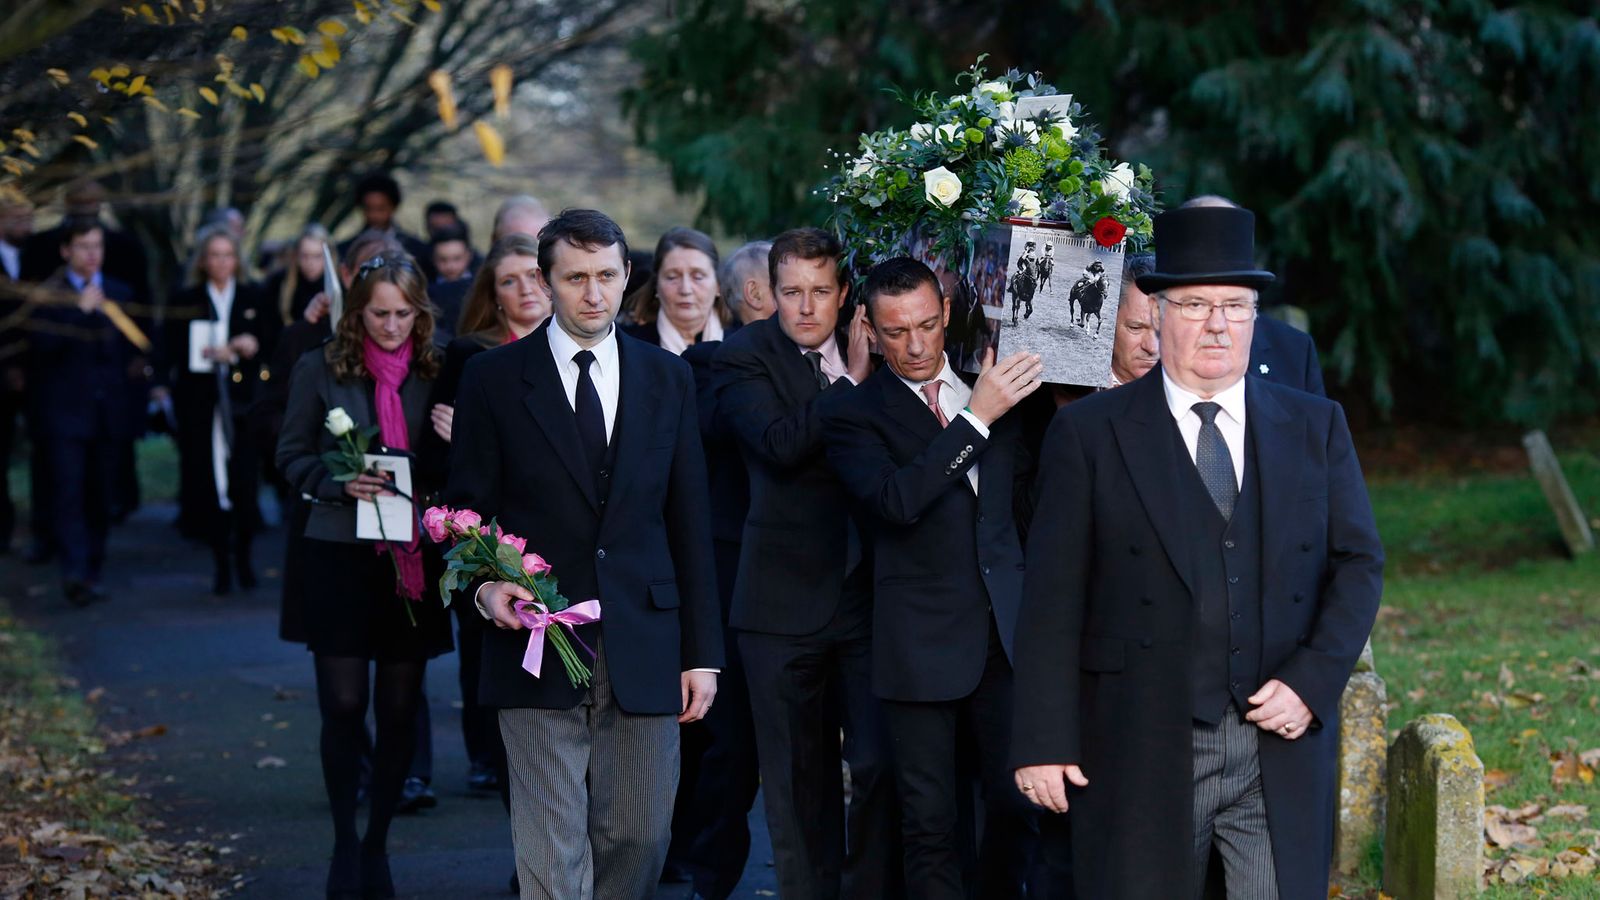 frankie-dettori-and-other-jockeys-carry-out-the-coffin-after-the-funeral-service-for-pat-eddery-sky-sports.jpg